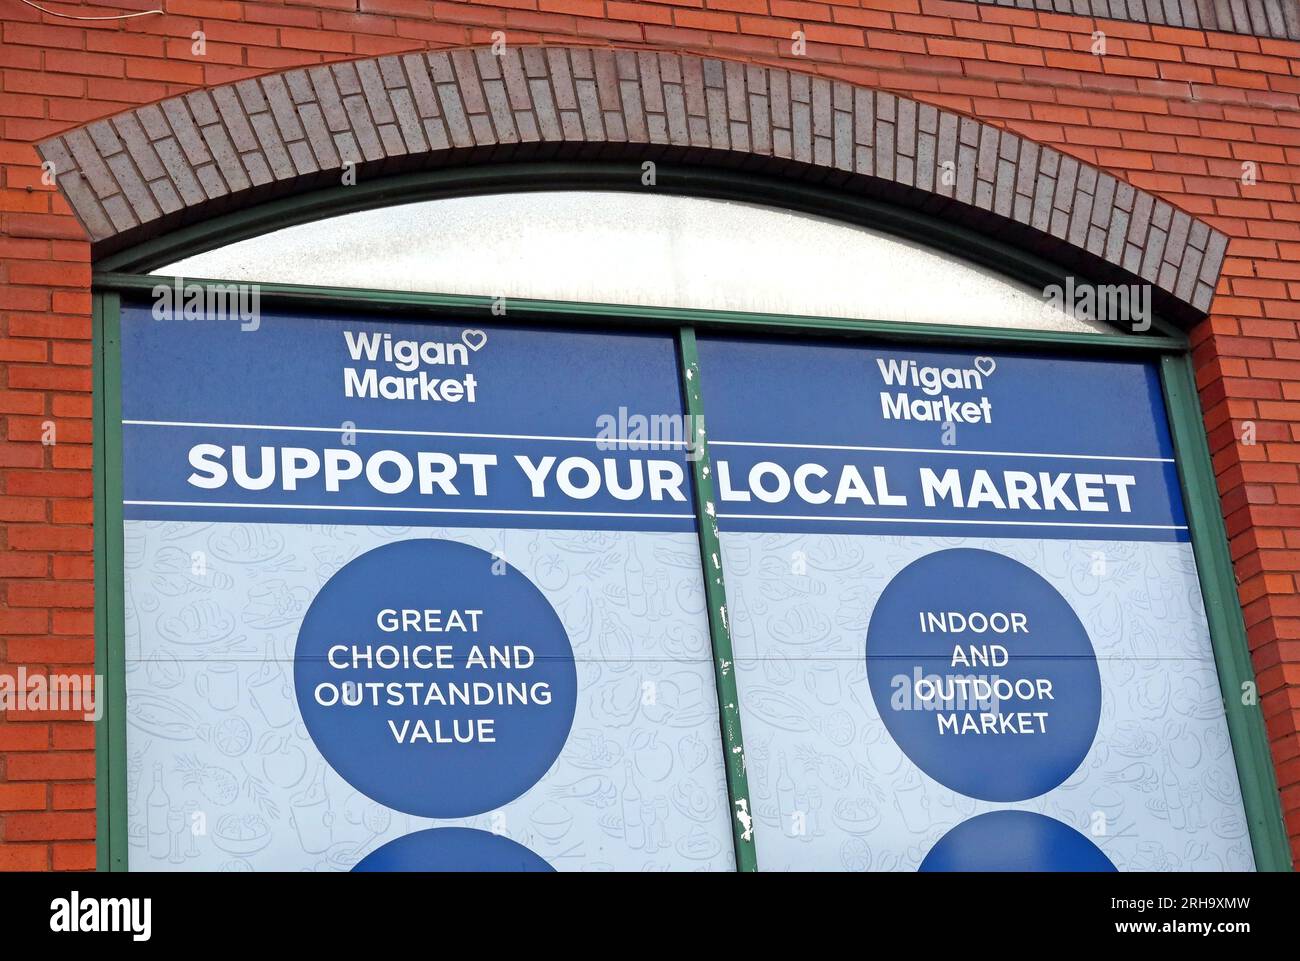 Support your local market - 1 Mesnes St, Wigan, Greater Manchester, England, UK,  WN1 1AR - Wigan Market Hall 1987 Stock Photo